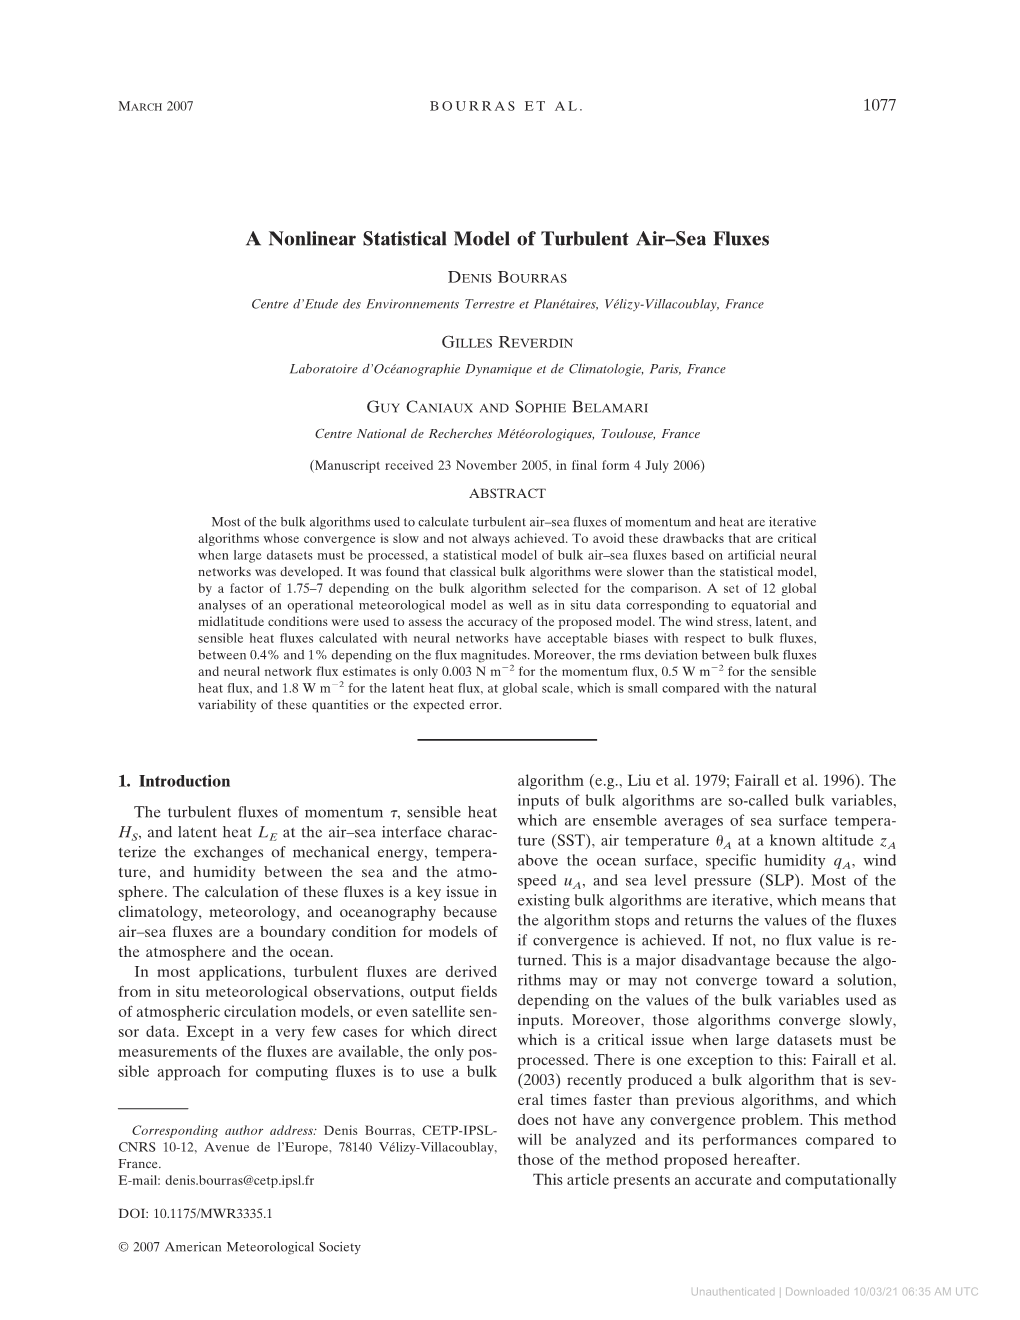 A Nonlinear Statistical Model of Turbulent Air–Sea Fluxes